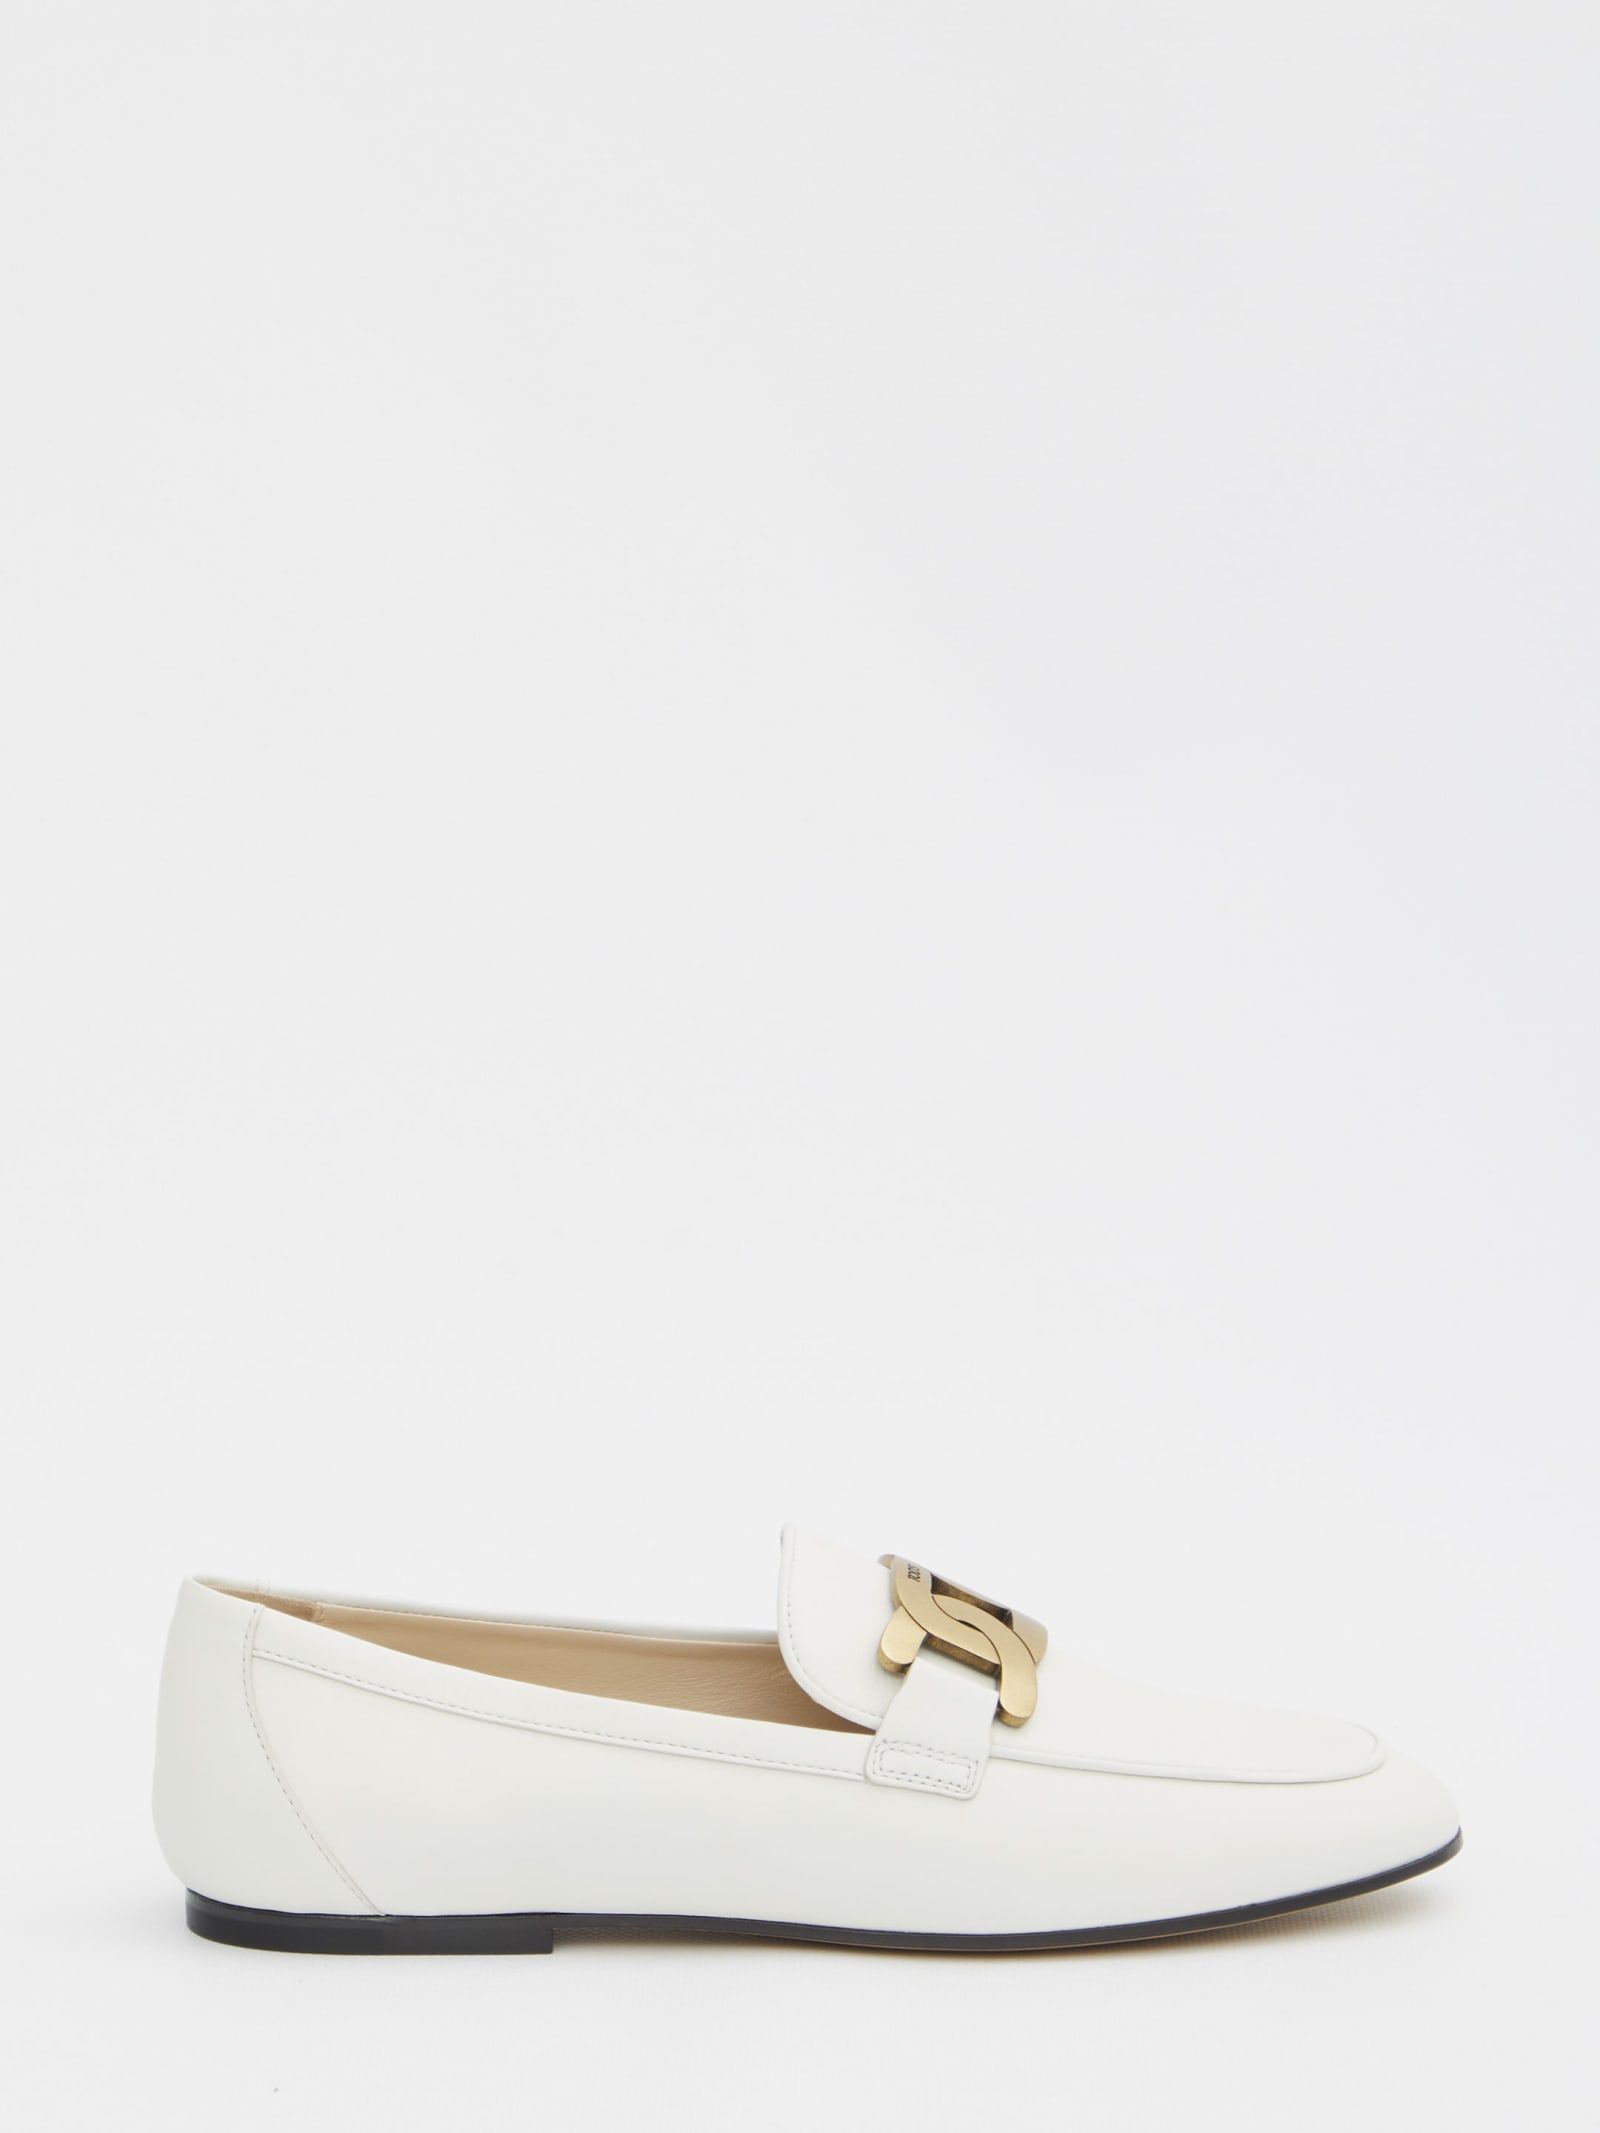 Tod's Kate Chain Leather Loafers | Smart Closet